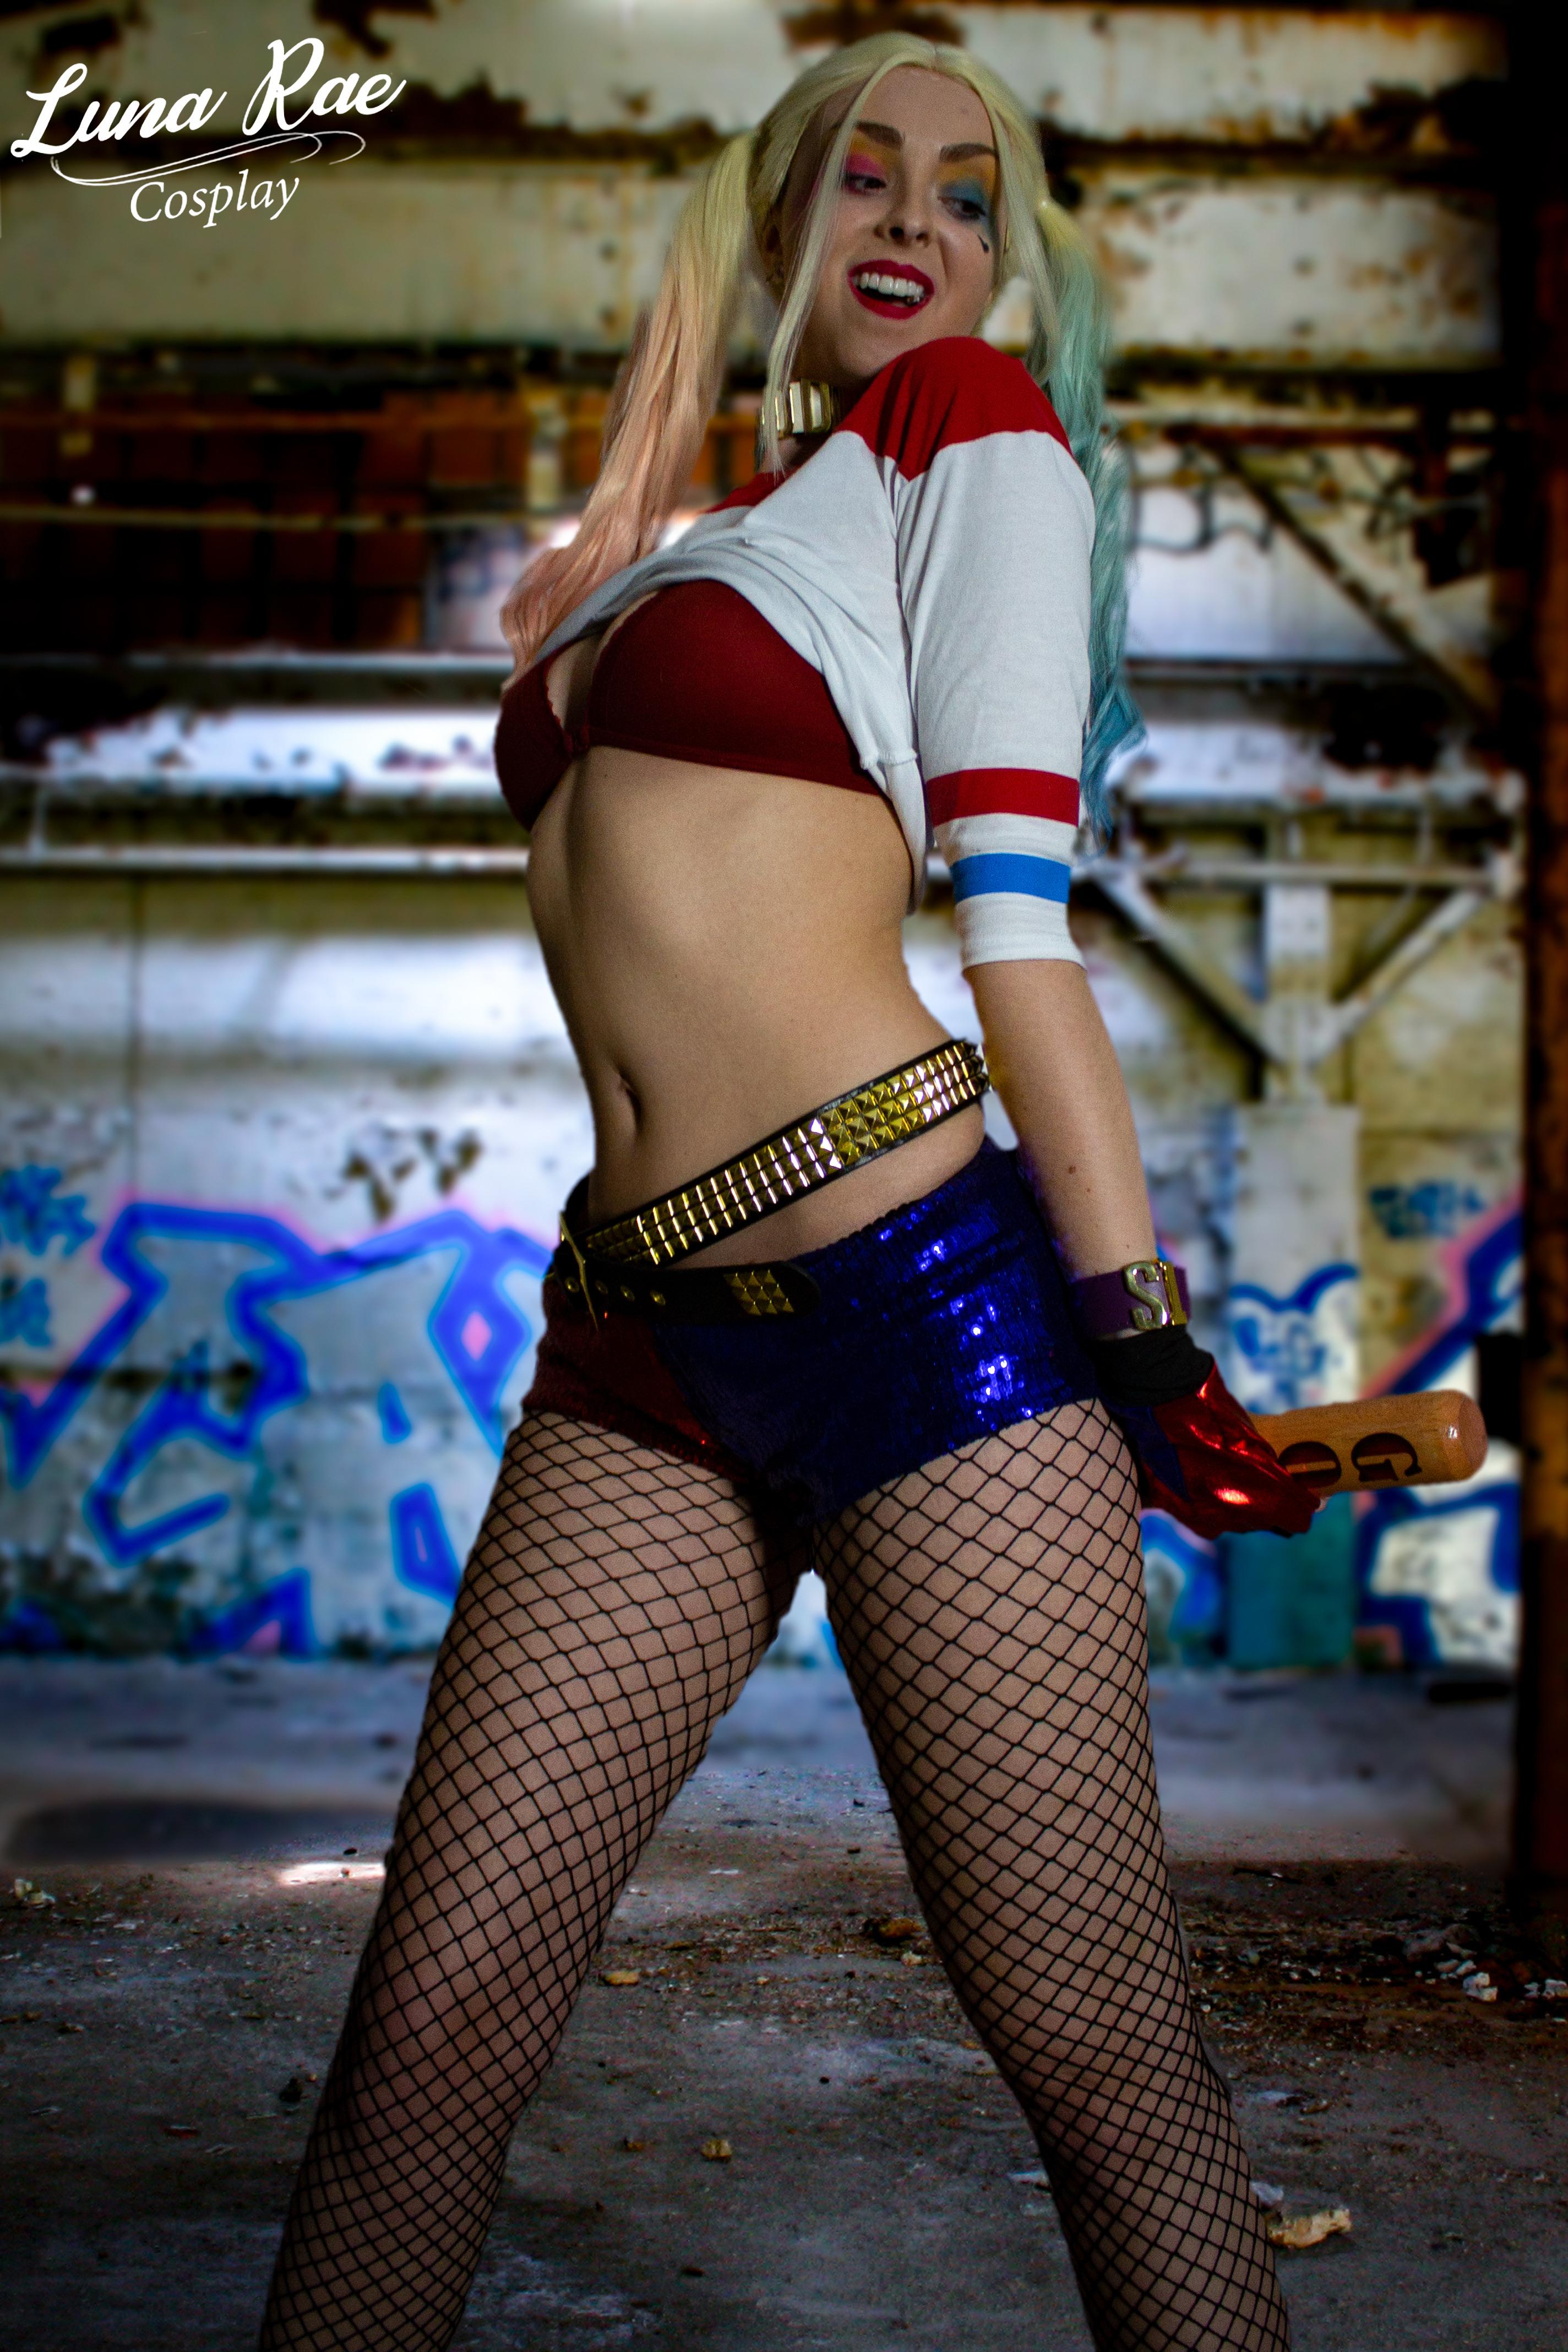 Harley Quinn Has Kidnapped You And Wants To Have Som Fun! By Lunaraecosplay